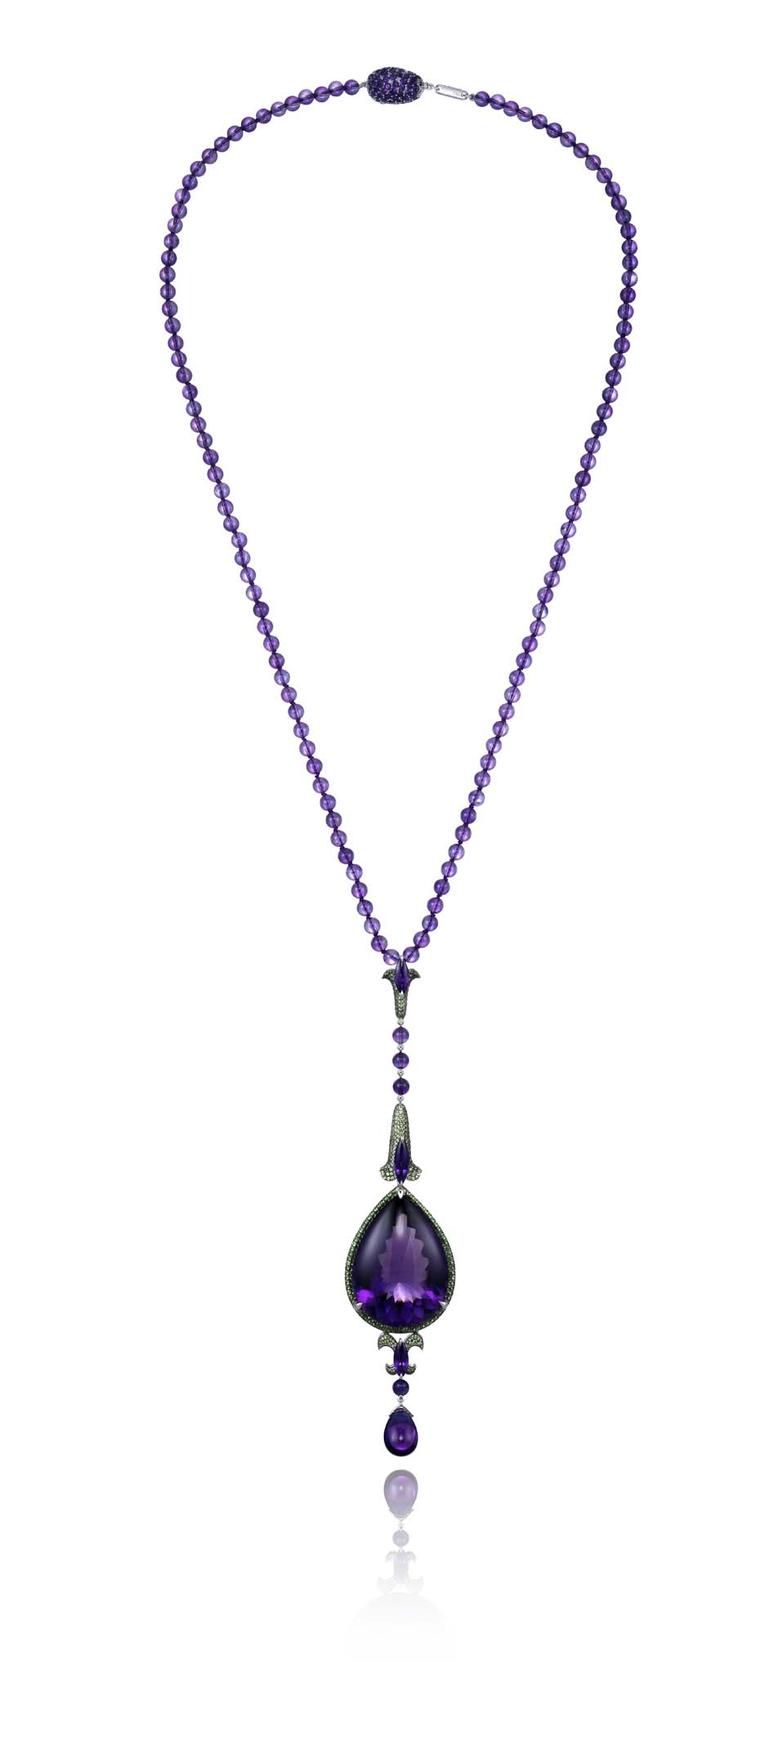 Chopard Red Carpet collection amethyst necklace